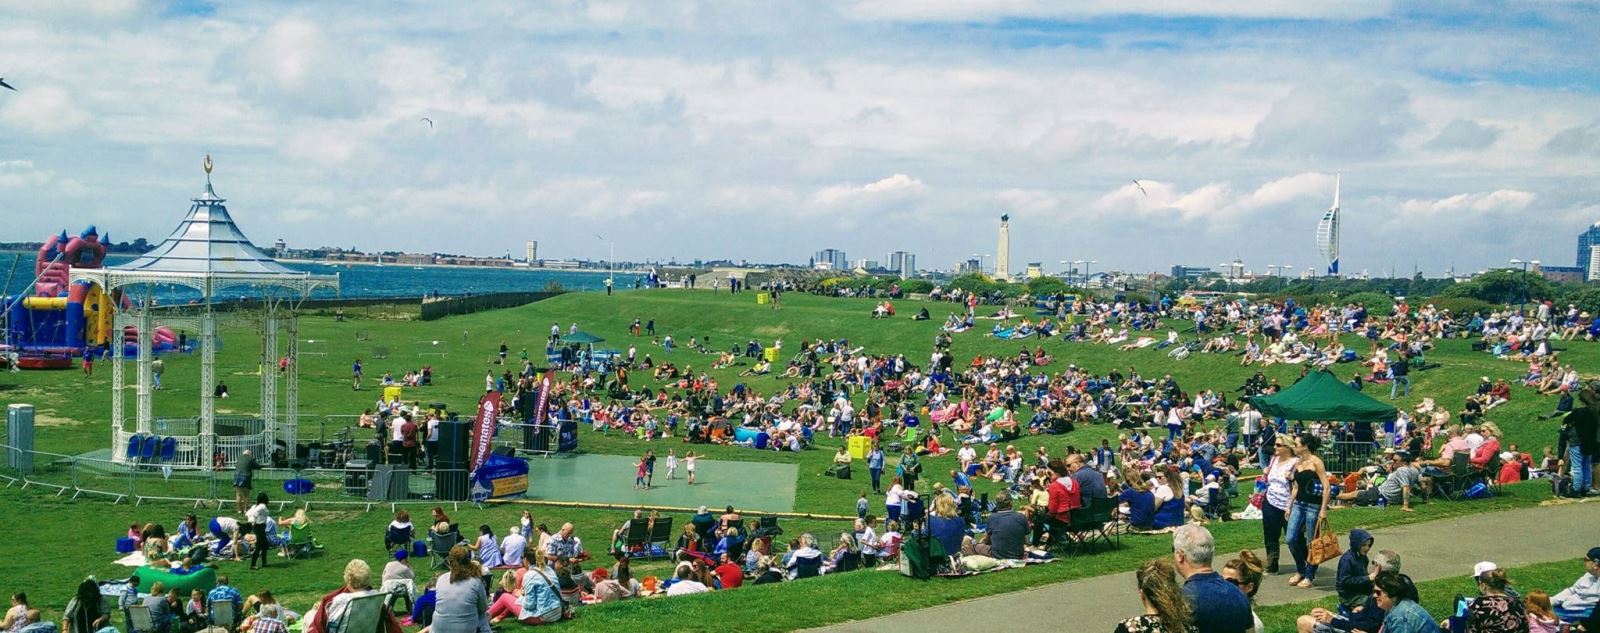 Photograph of people enjoying Southsea Bandstand